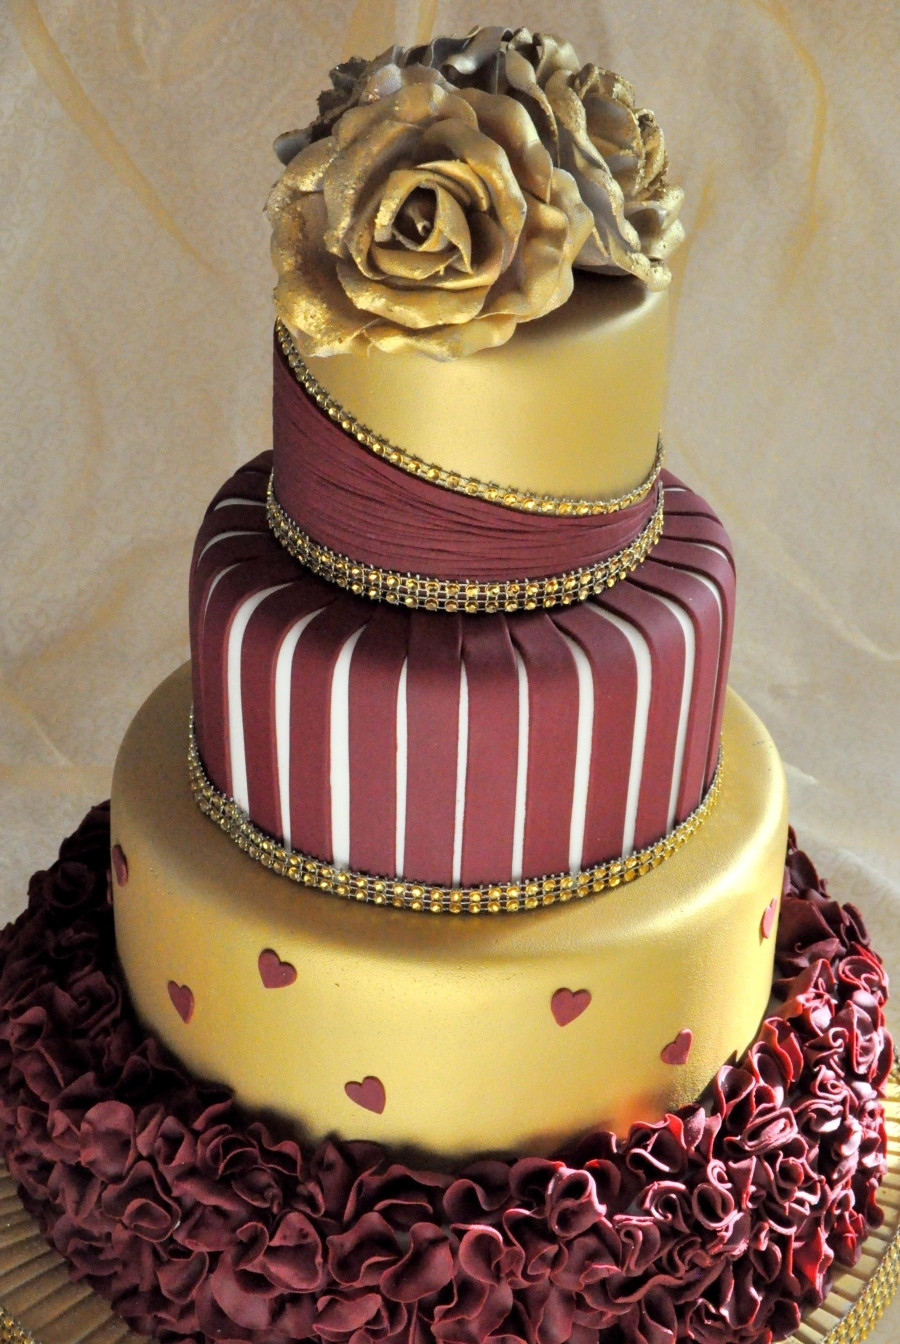 Burgundy Wedding Cakes
 Gold And Burgundy Wedding Cake With Ruffles And Roses